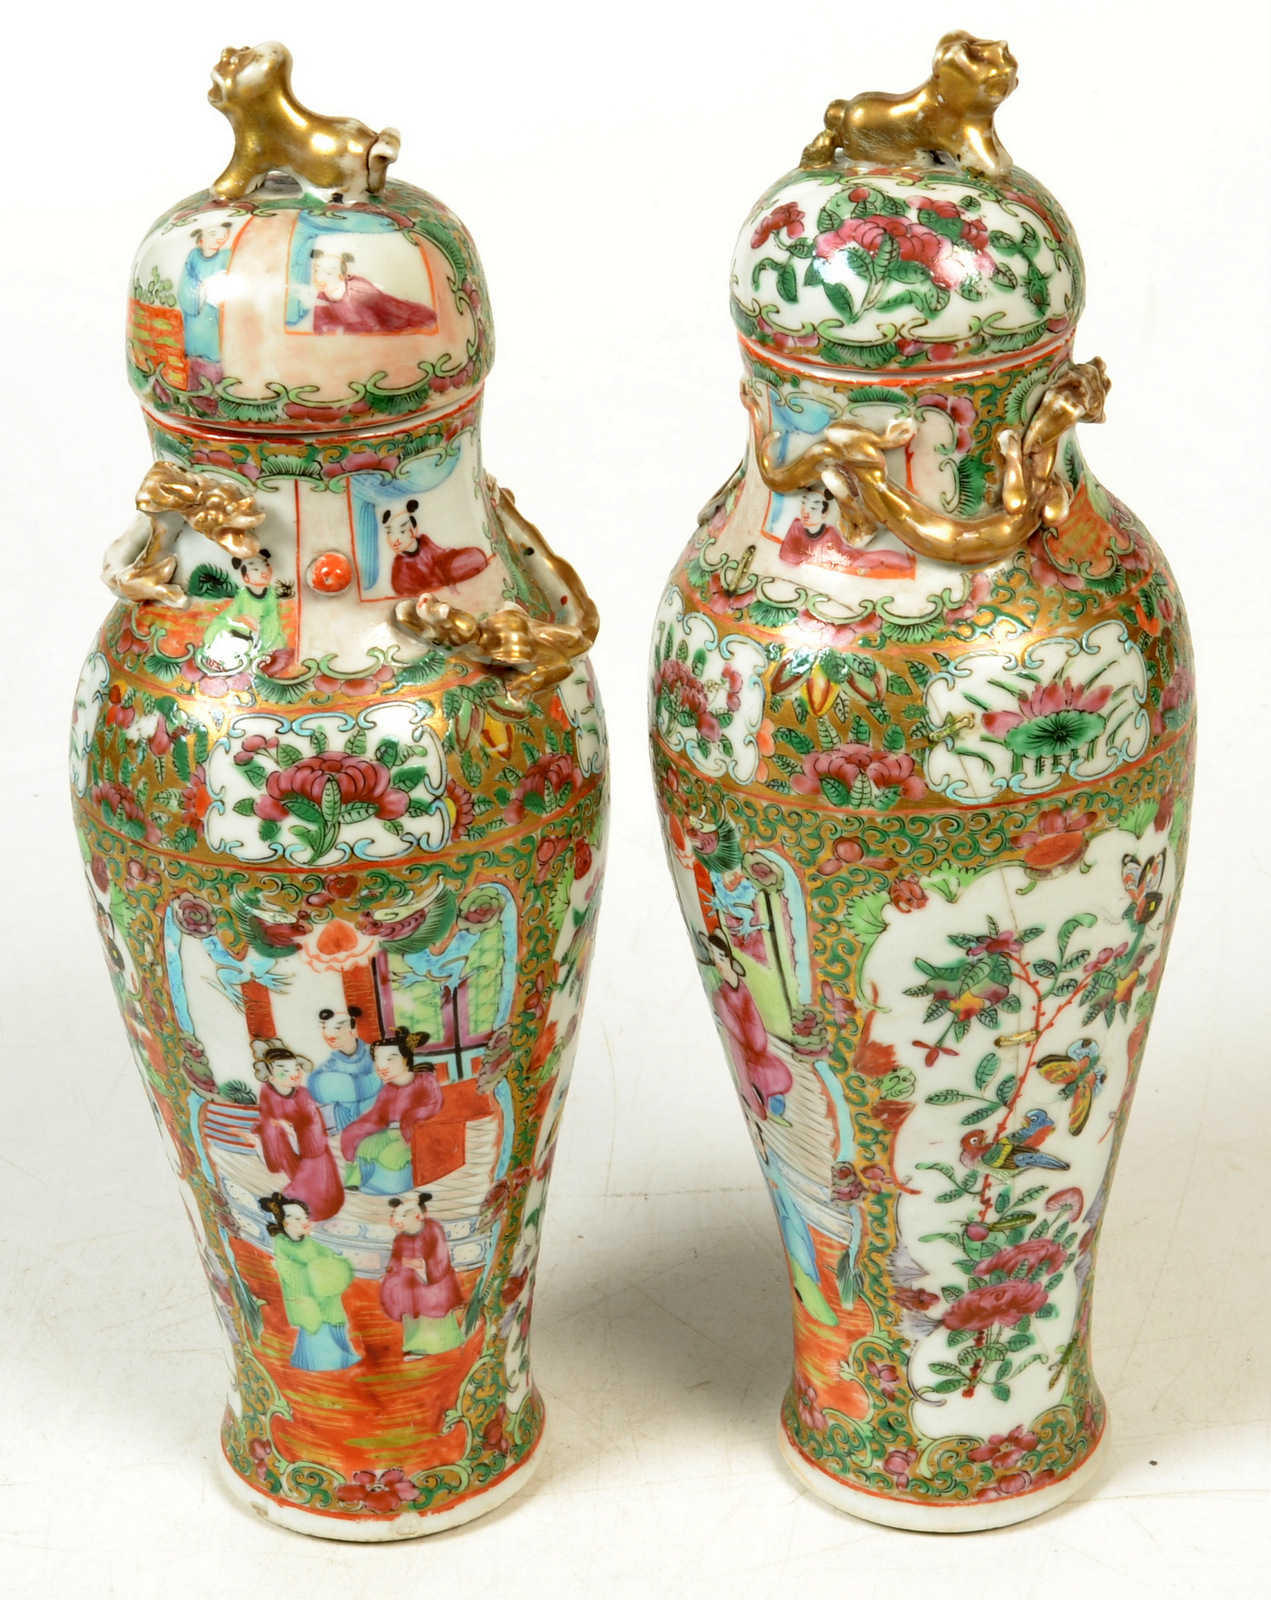 A pair of 19th century Cantonese vases with covers, decorated with interior scenes, flowers,